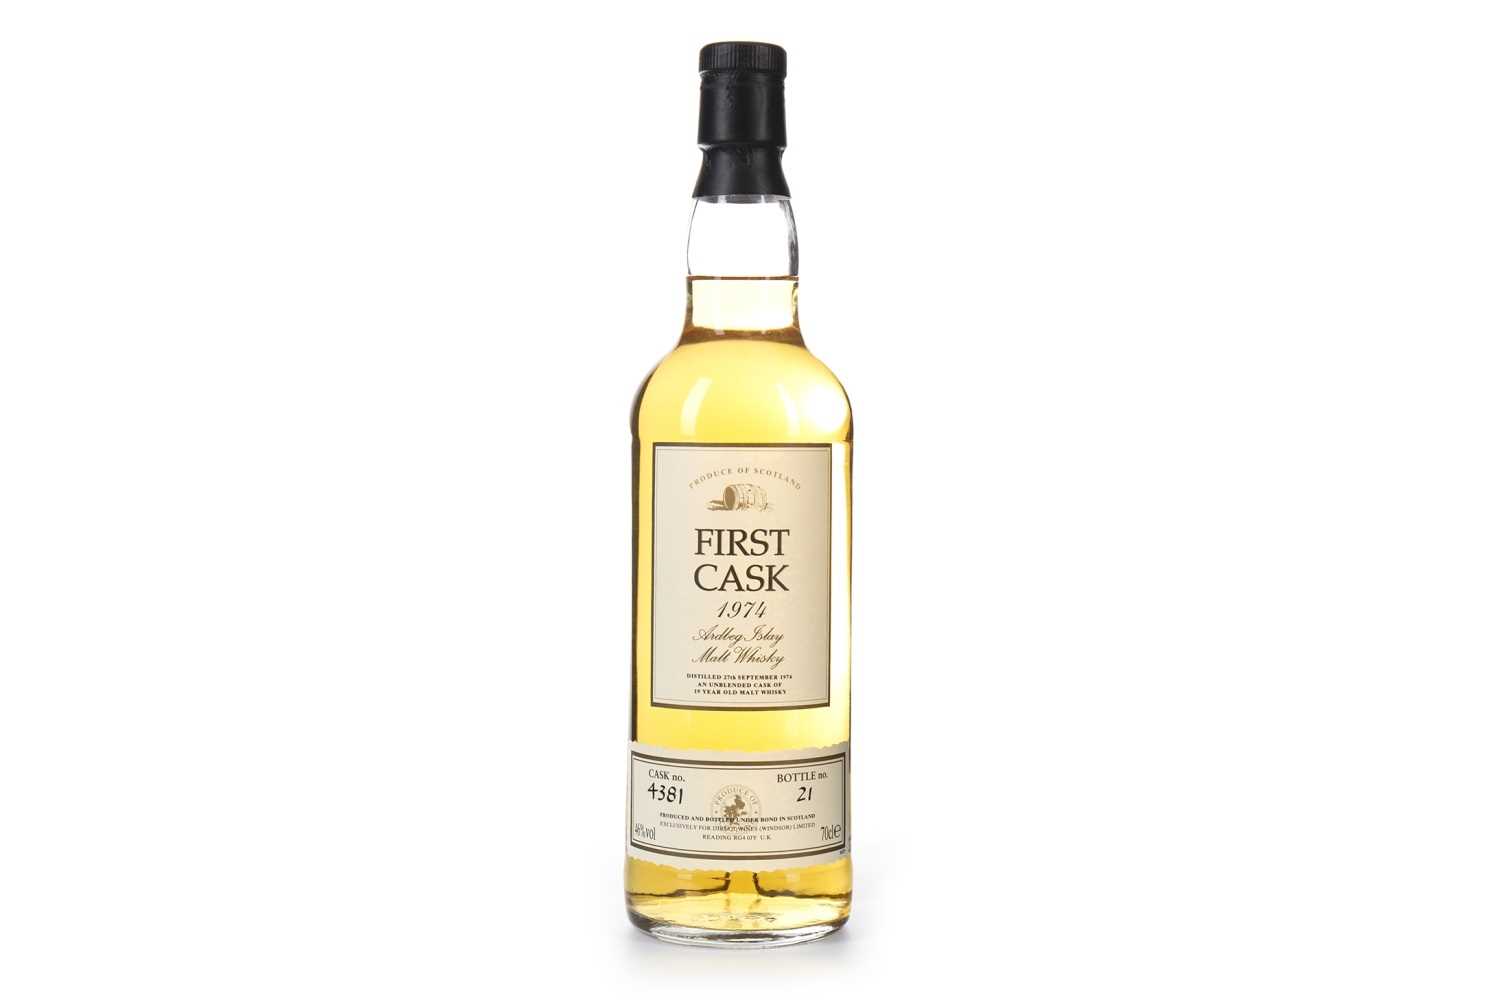 Lot 27 - ARDBEG 1974 FIRST CASK AGED 19 YEARS